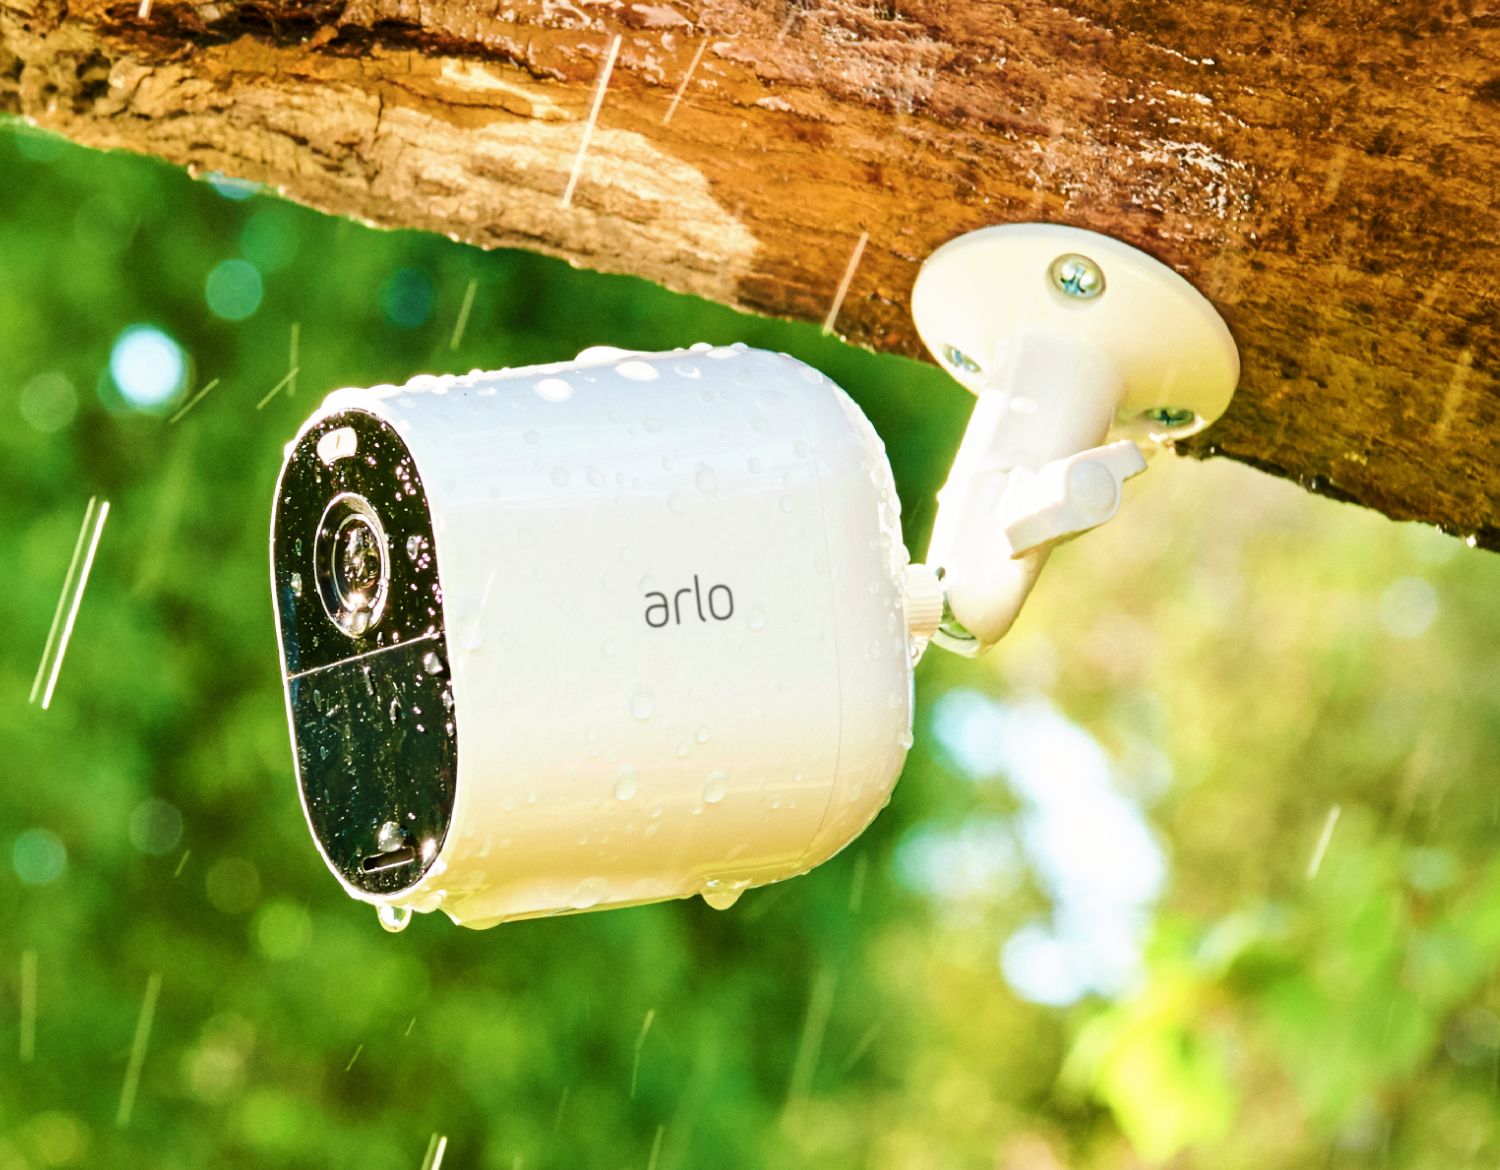 The Arlo Essential XL security camera attached to a tree in the rain, built to withstand rain, snow, cold and sun